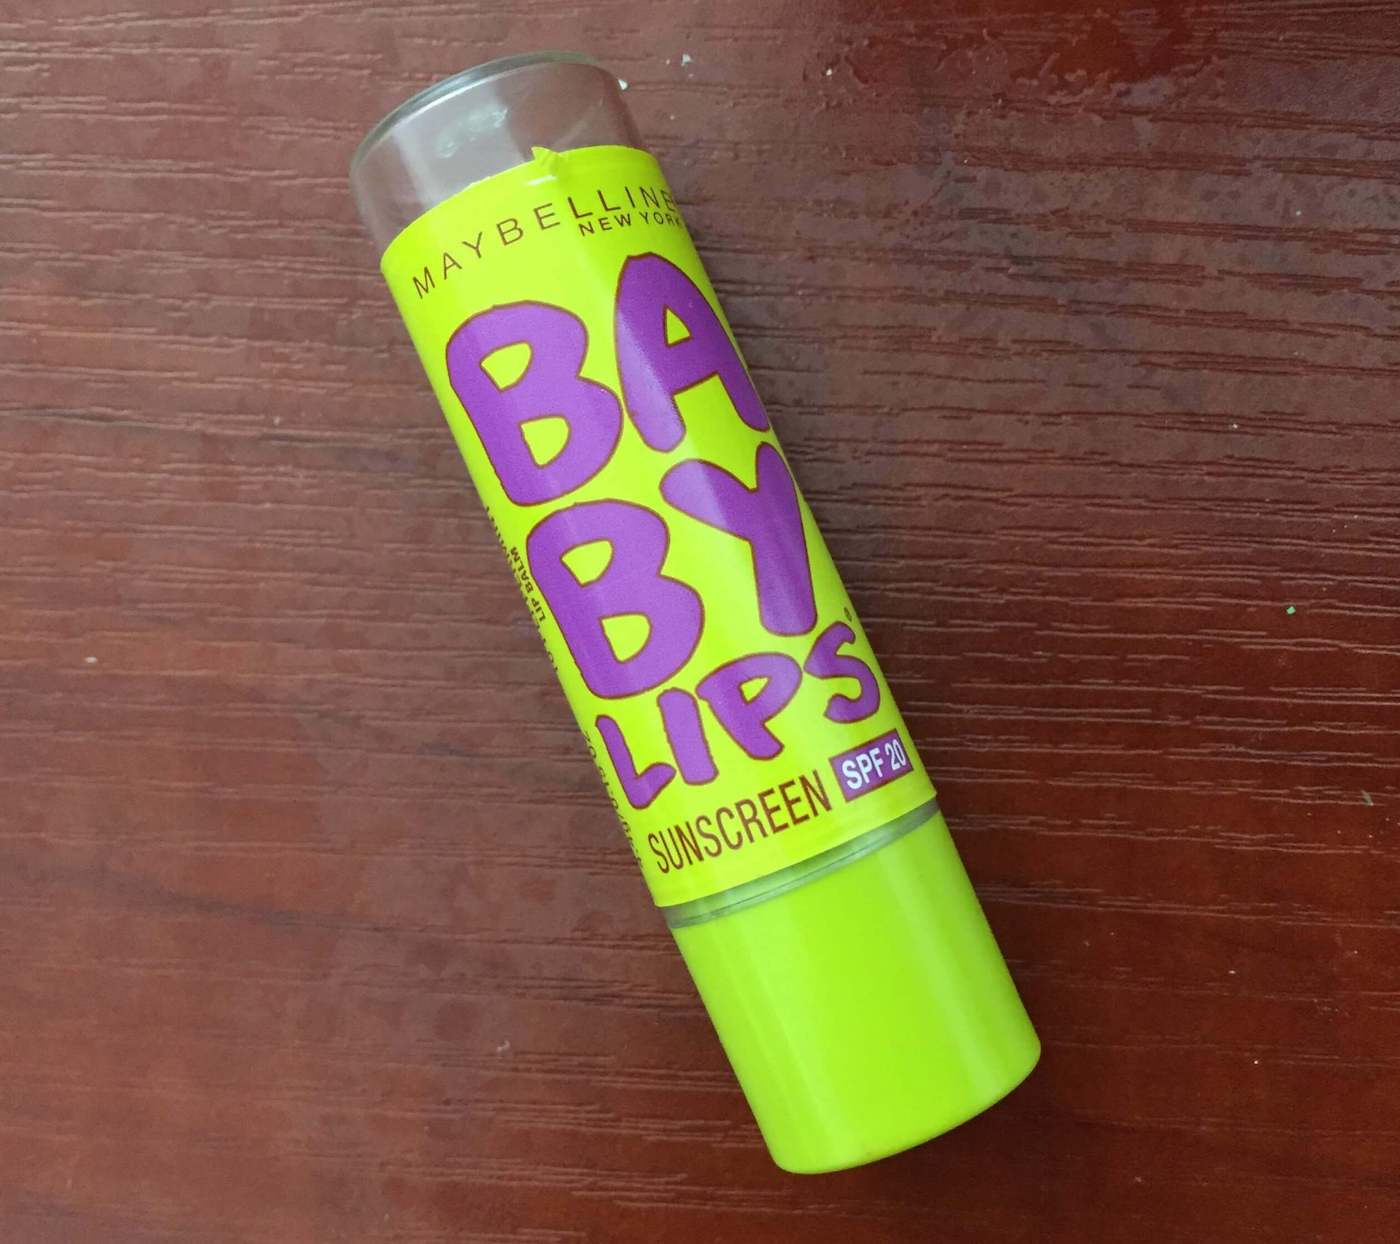 maybelline baby lips sunscreen lip balm review